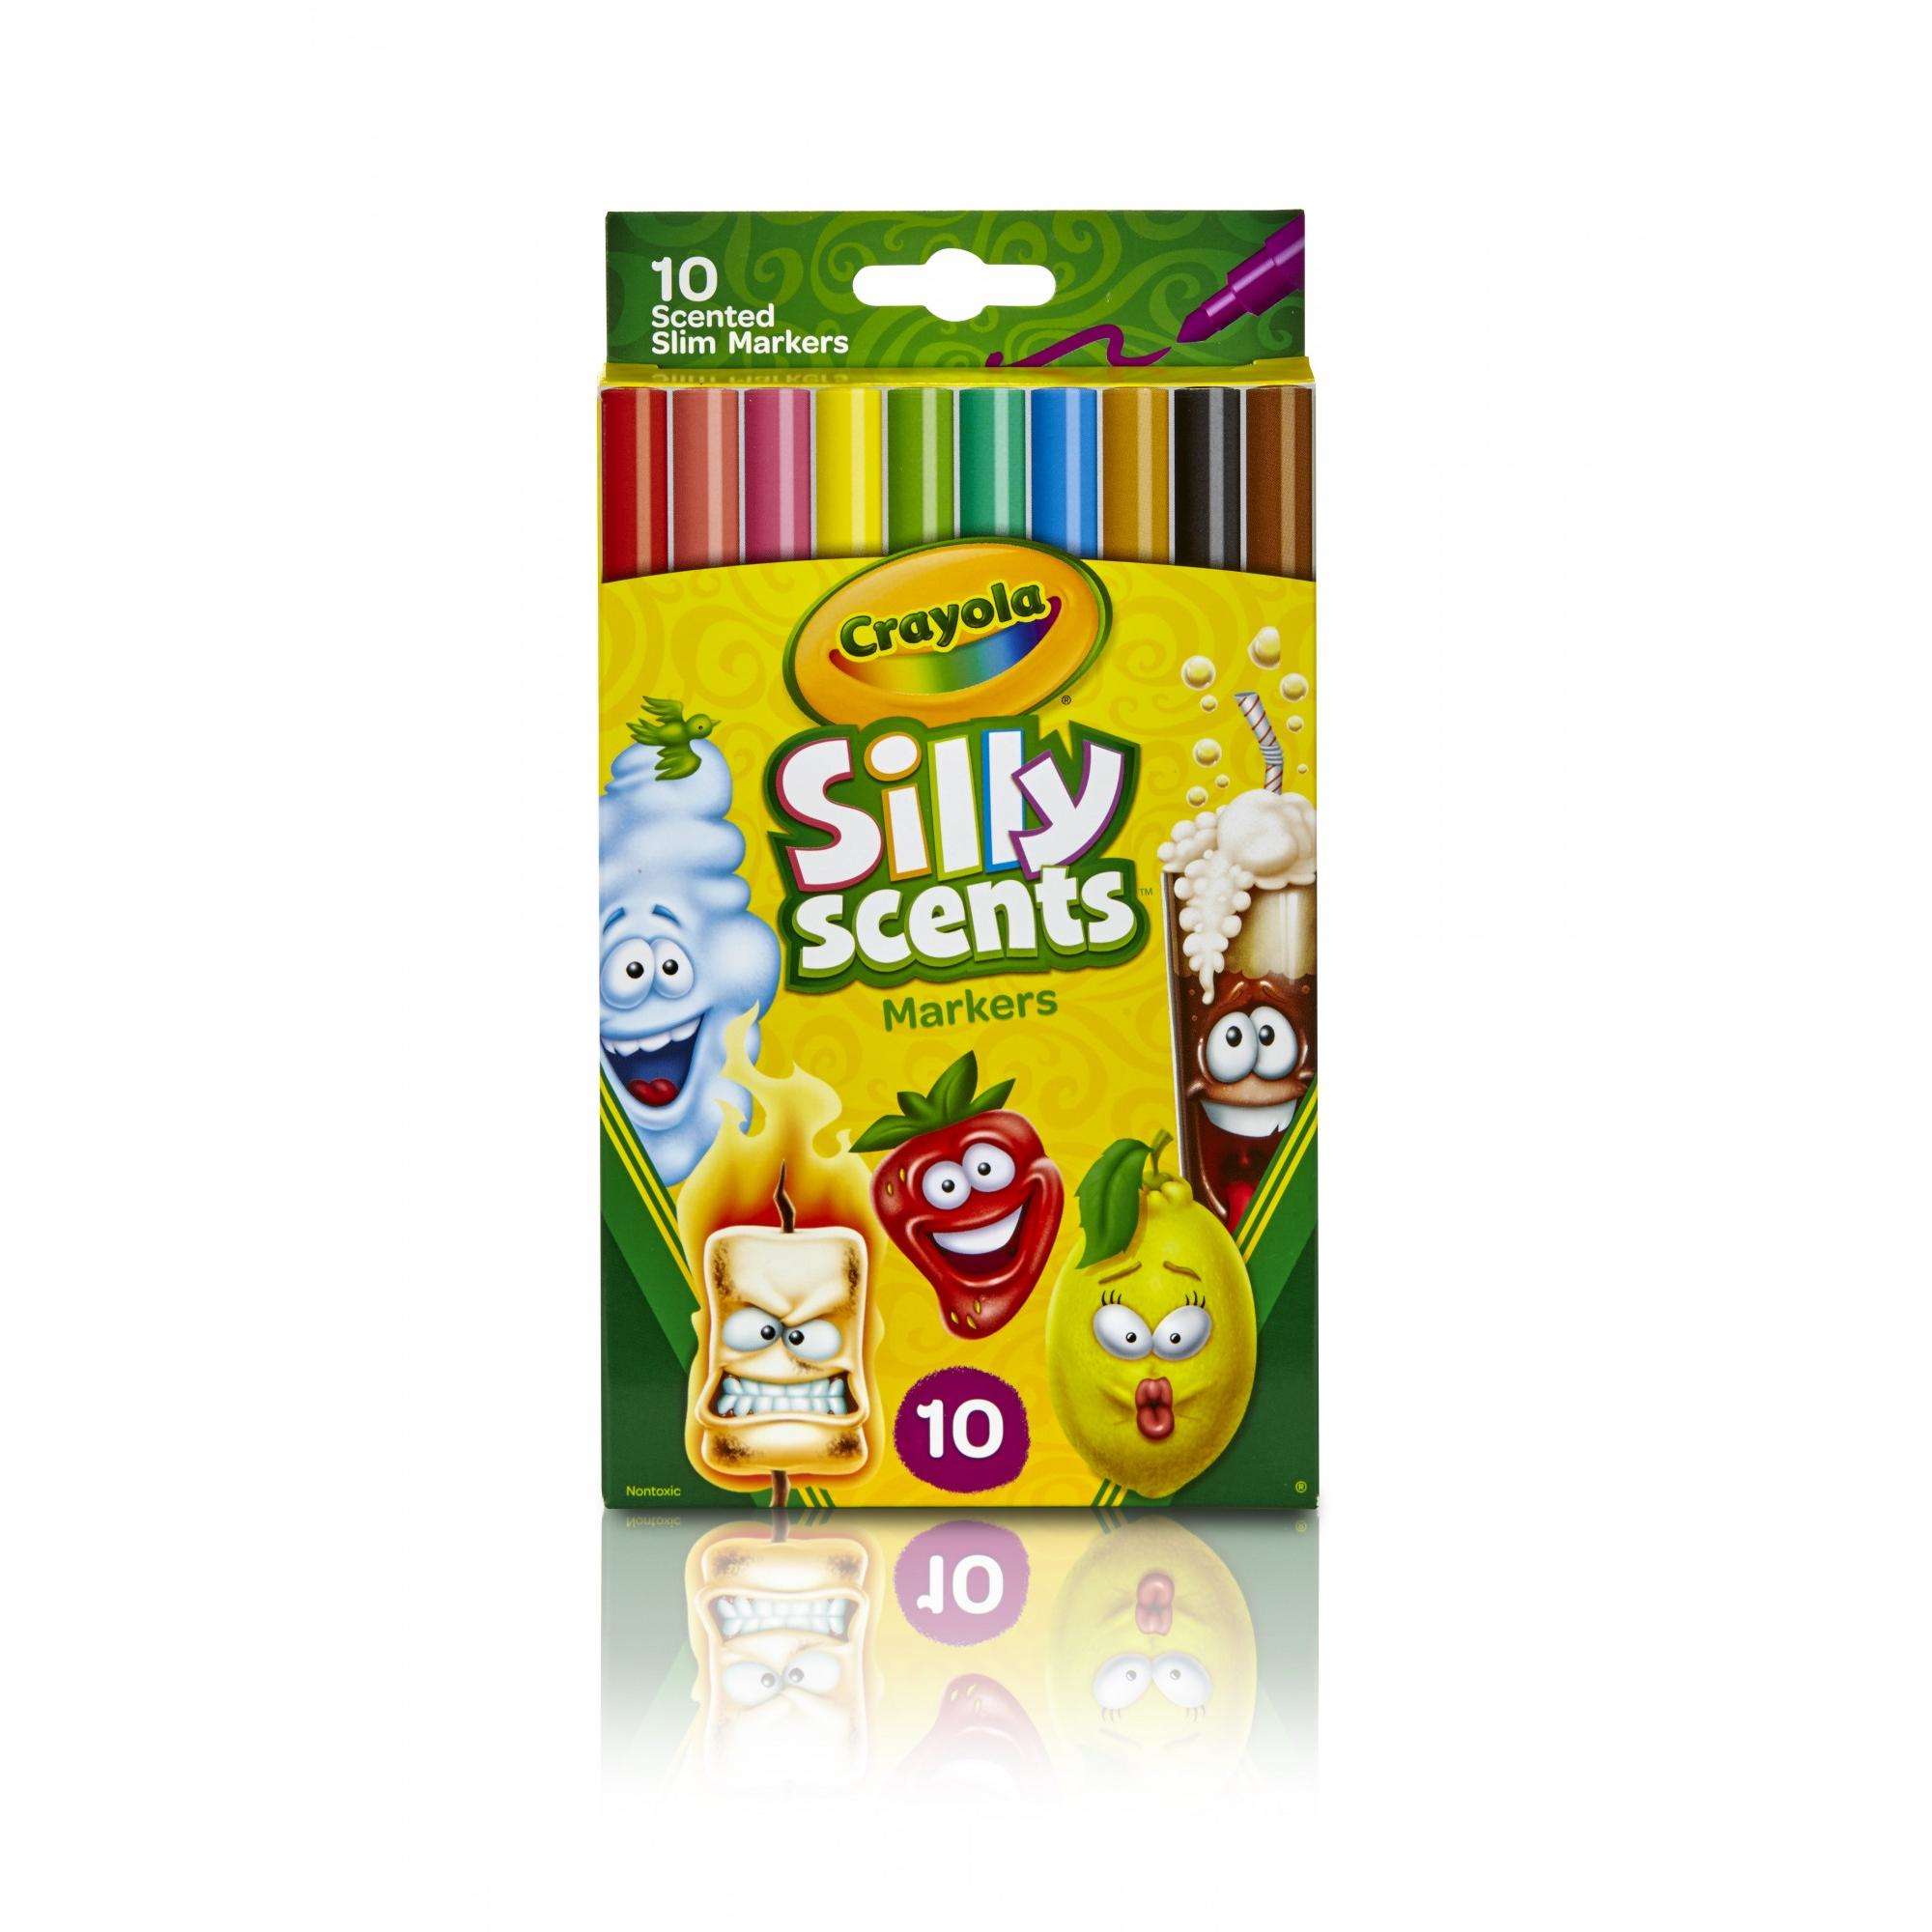 Crayola Silly Scents Slim Markers, Washable Scented Markers For Kids, 10 Pieces - image 1 of 8